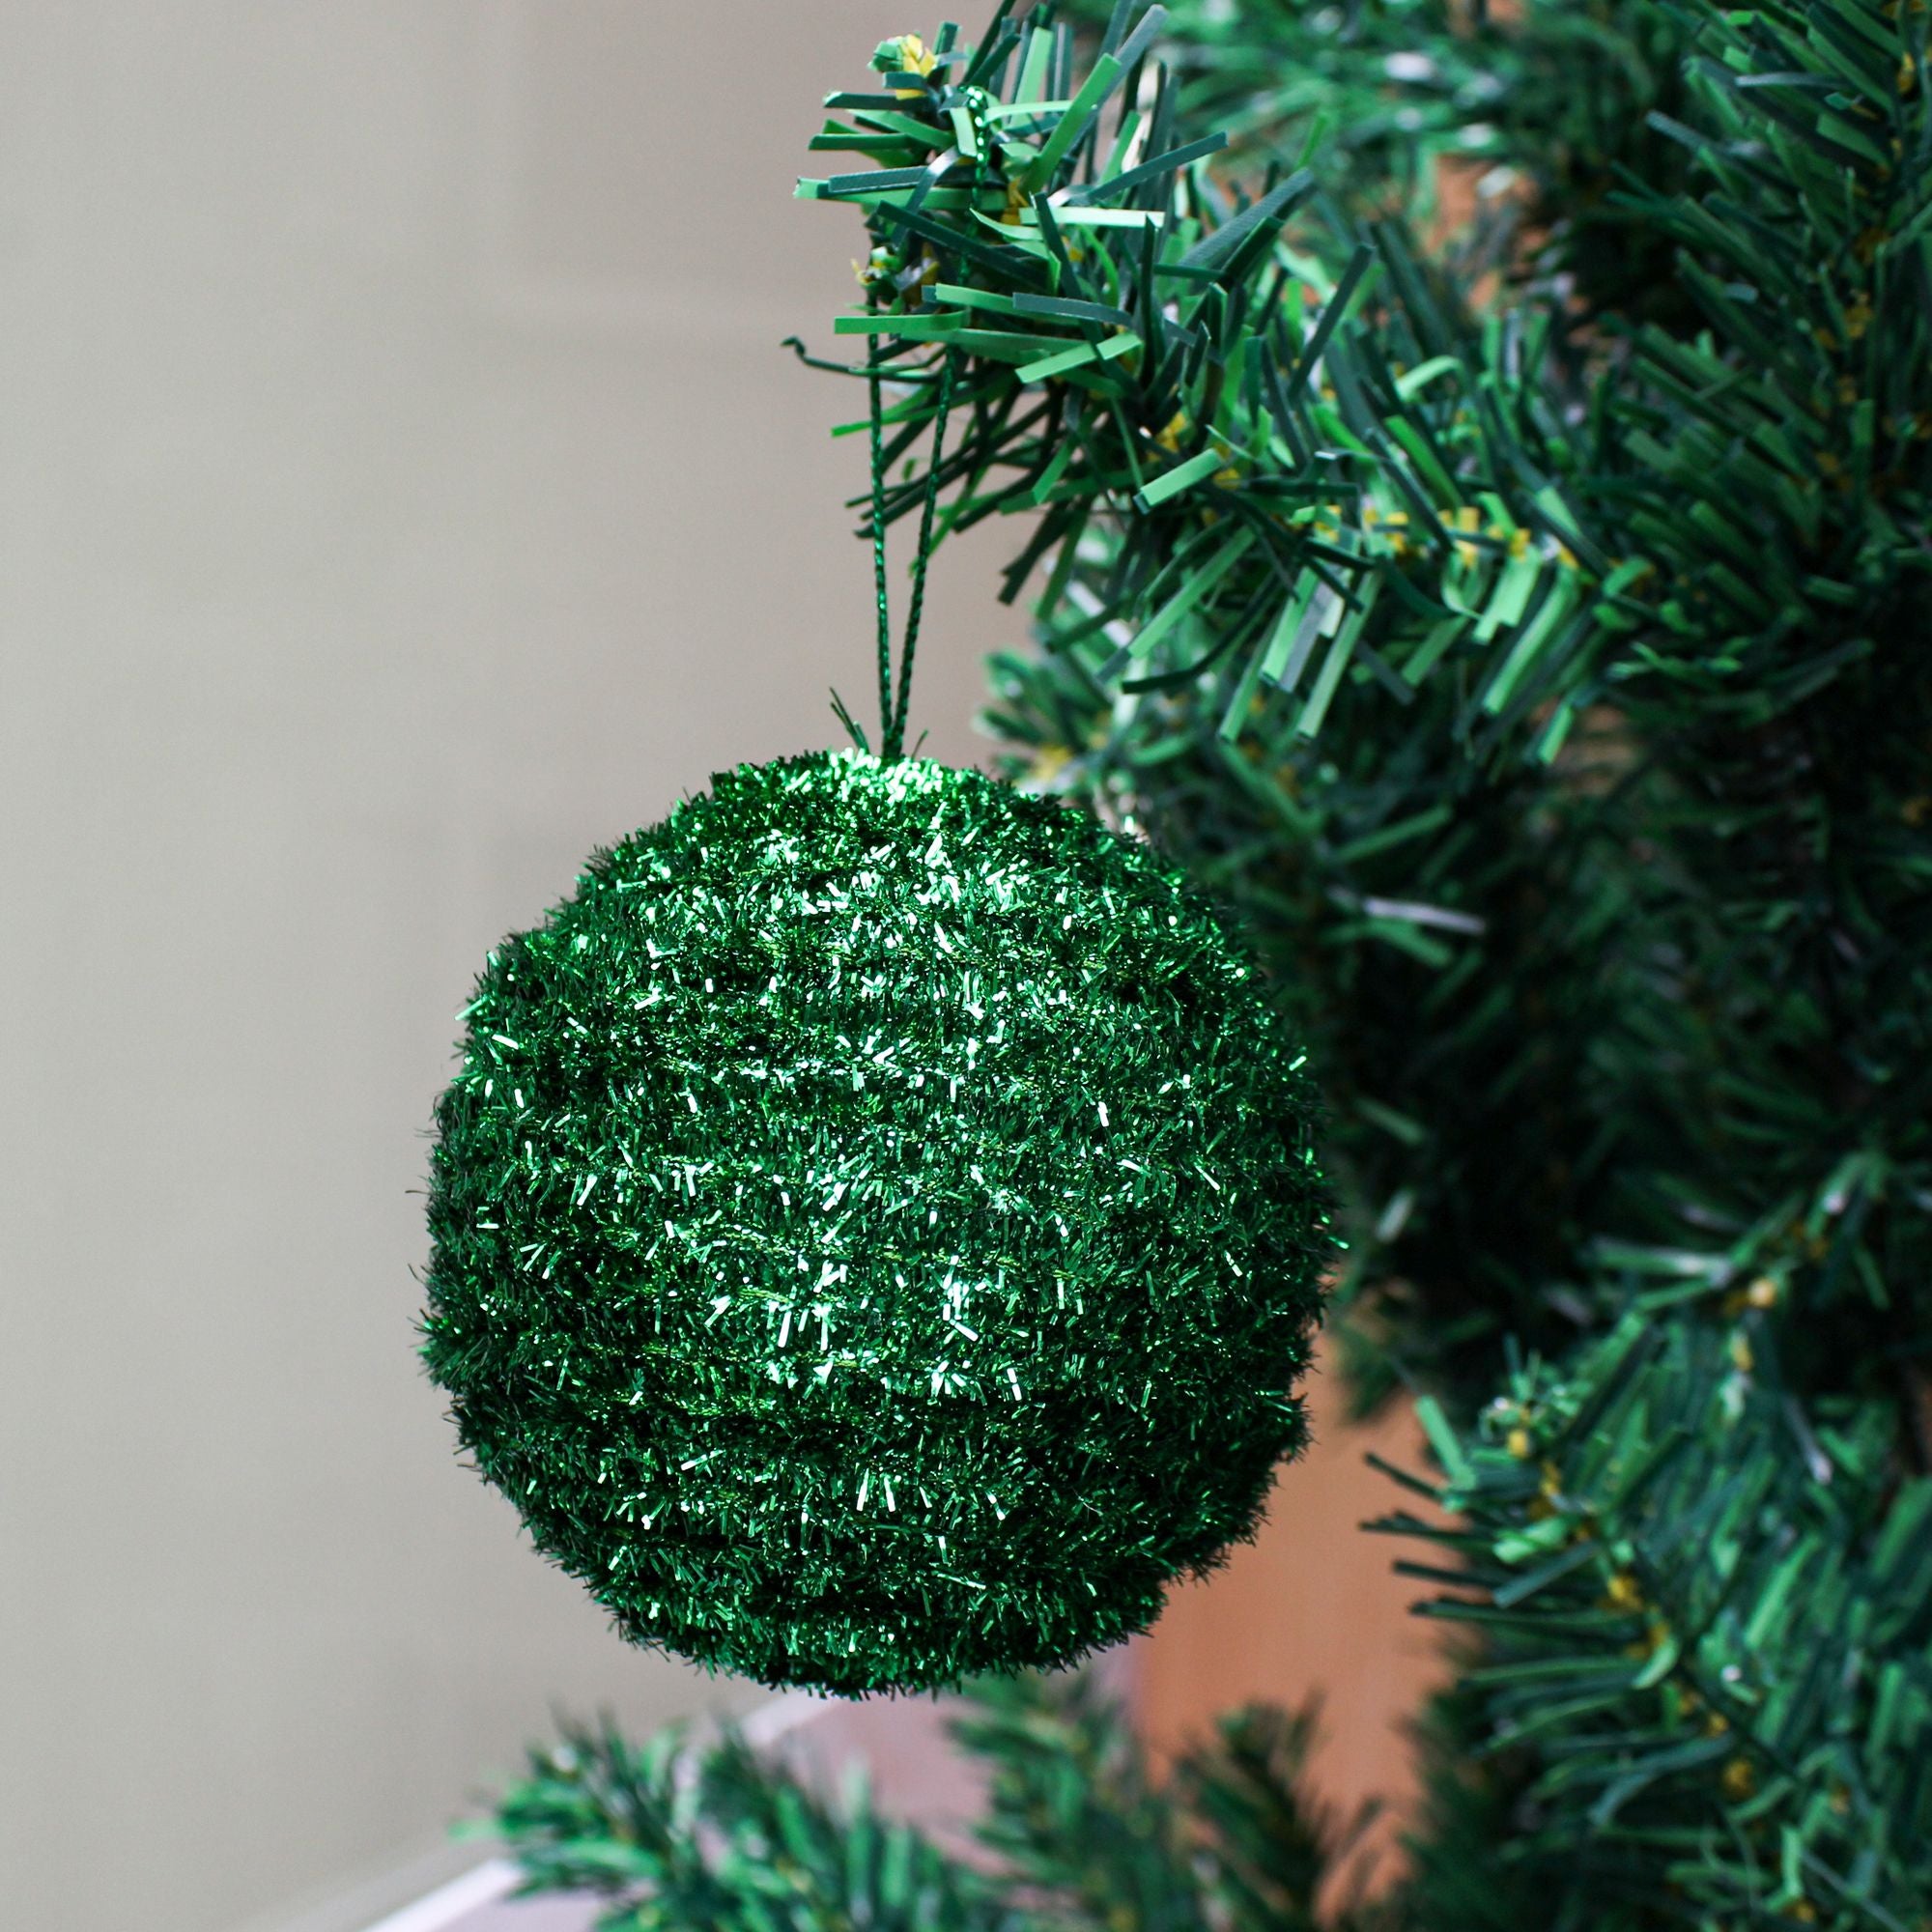 Handmade Christmas Ornaments - Tinsel Baubles, 70mm, Green, 2pc